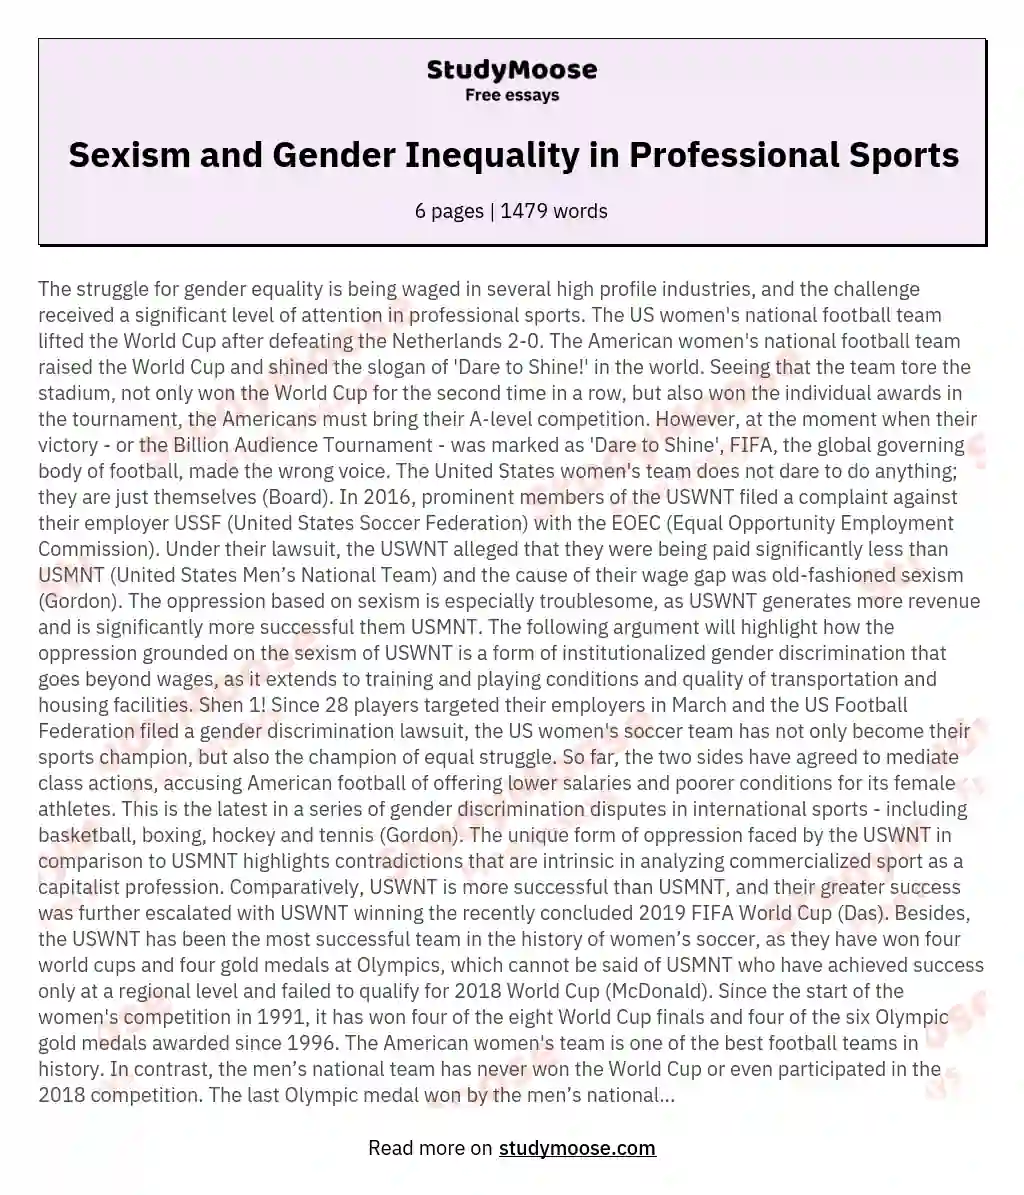 Sexism and Gender Inequality in Professional Sports